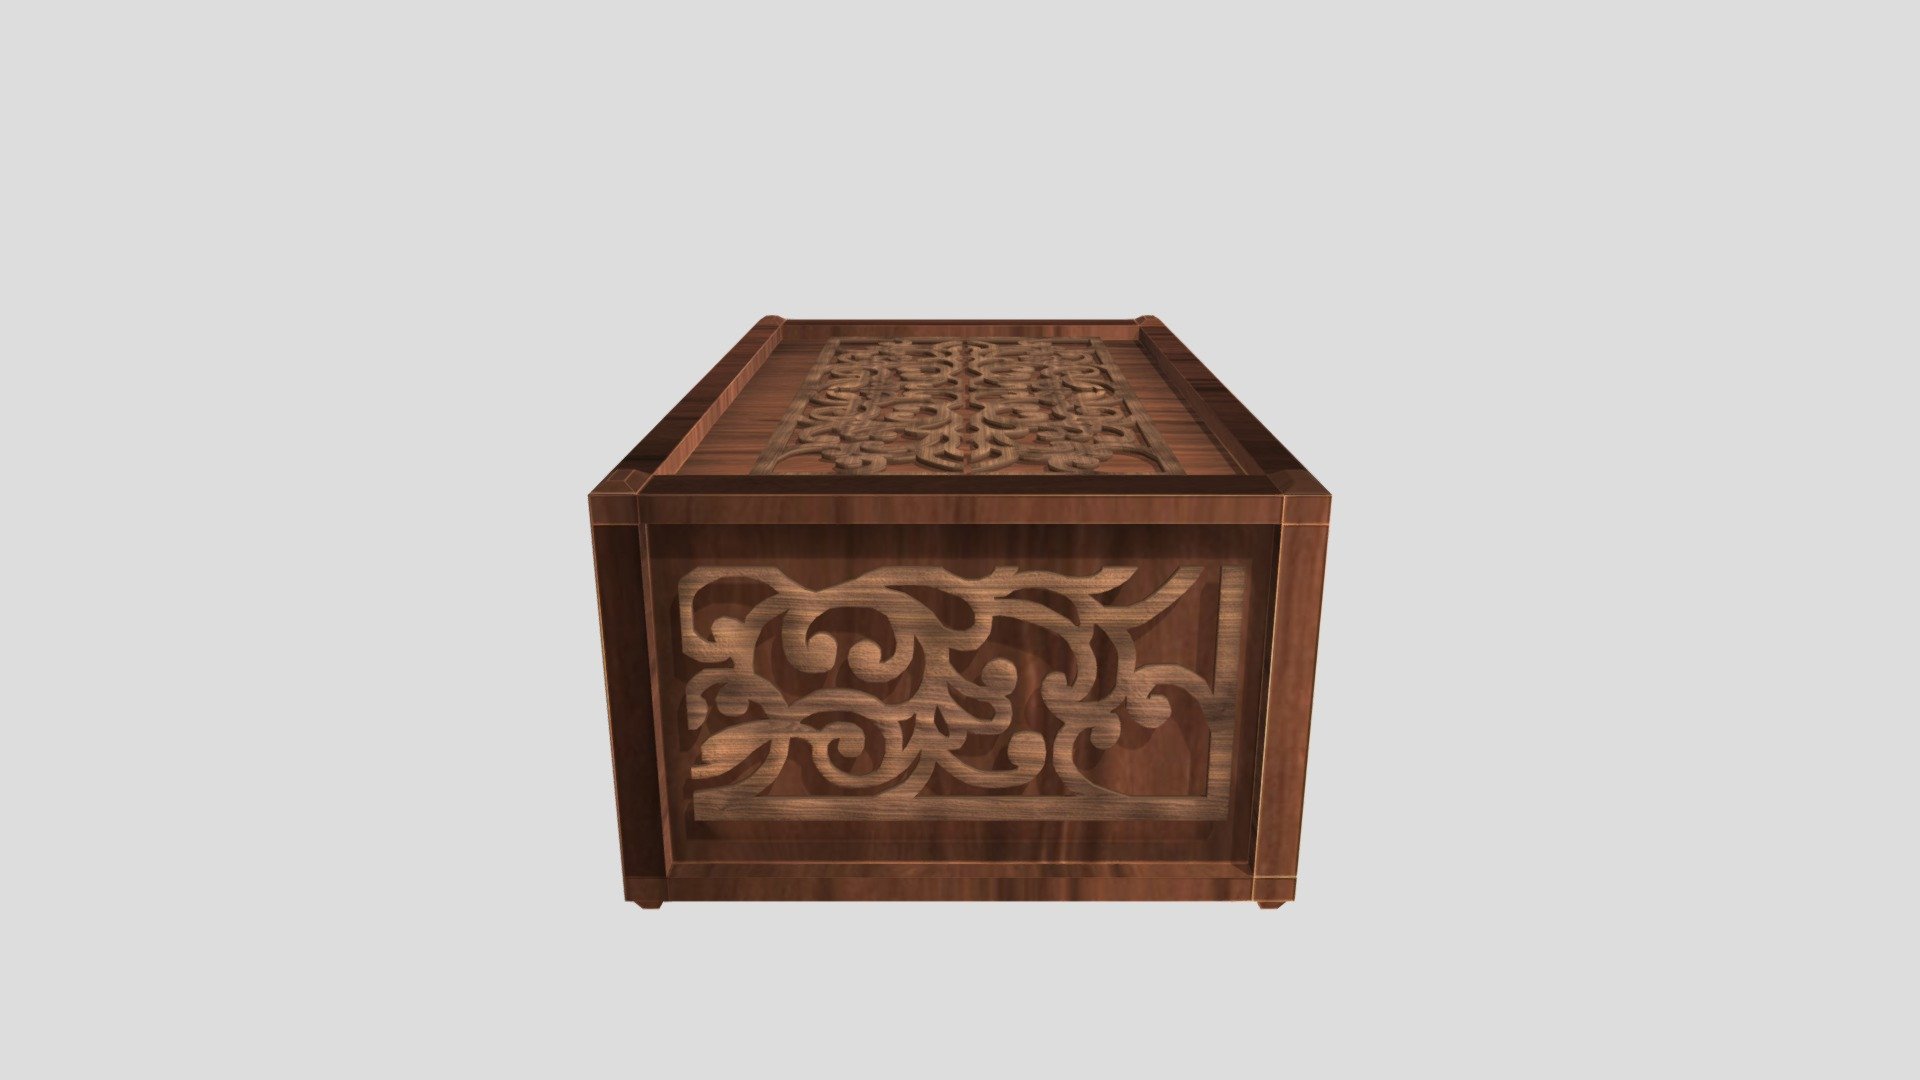 A wooden box fashioned with numerous wood patterned ornaments - Ornament Box - Download Free 3D model by Patrick Shiran (@Patricado) 3d model